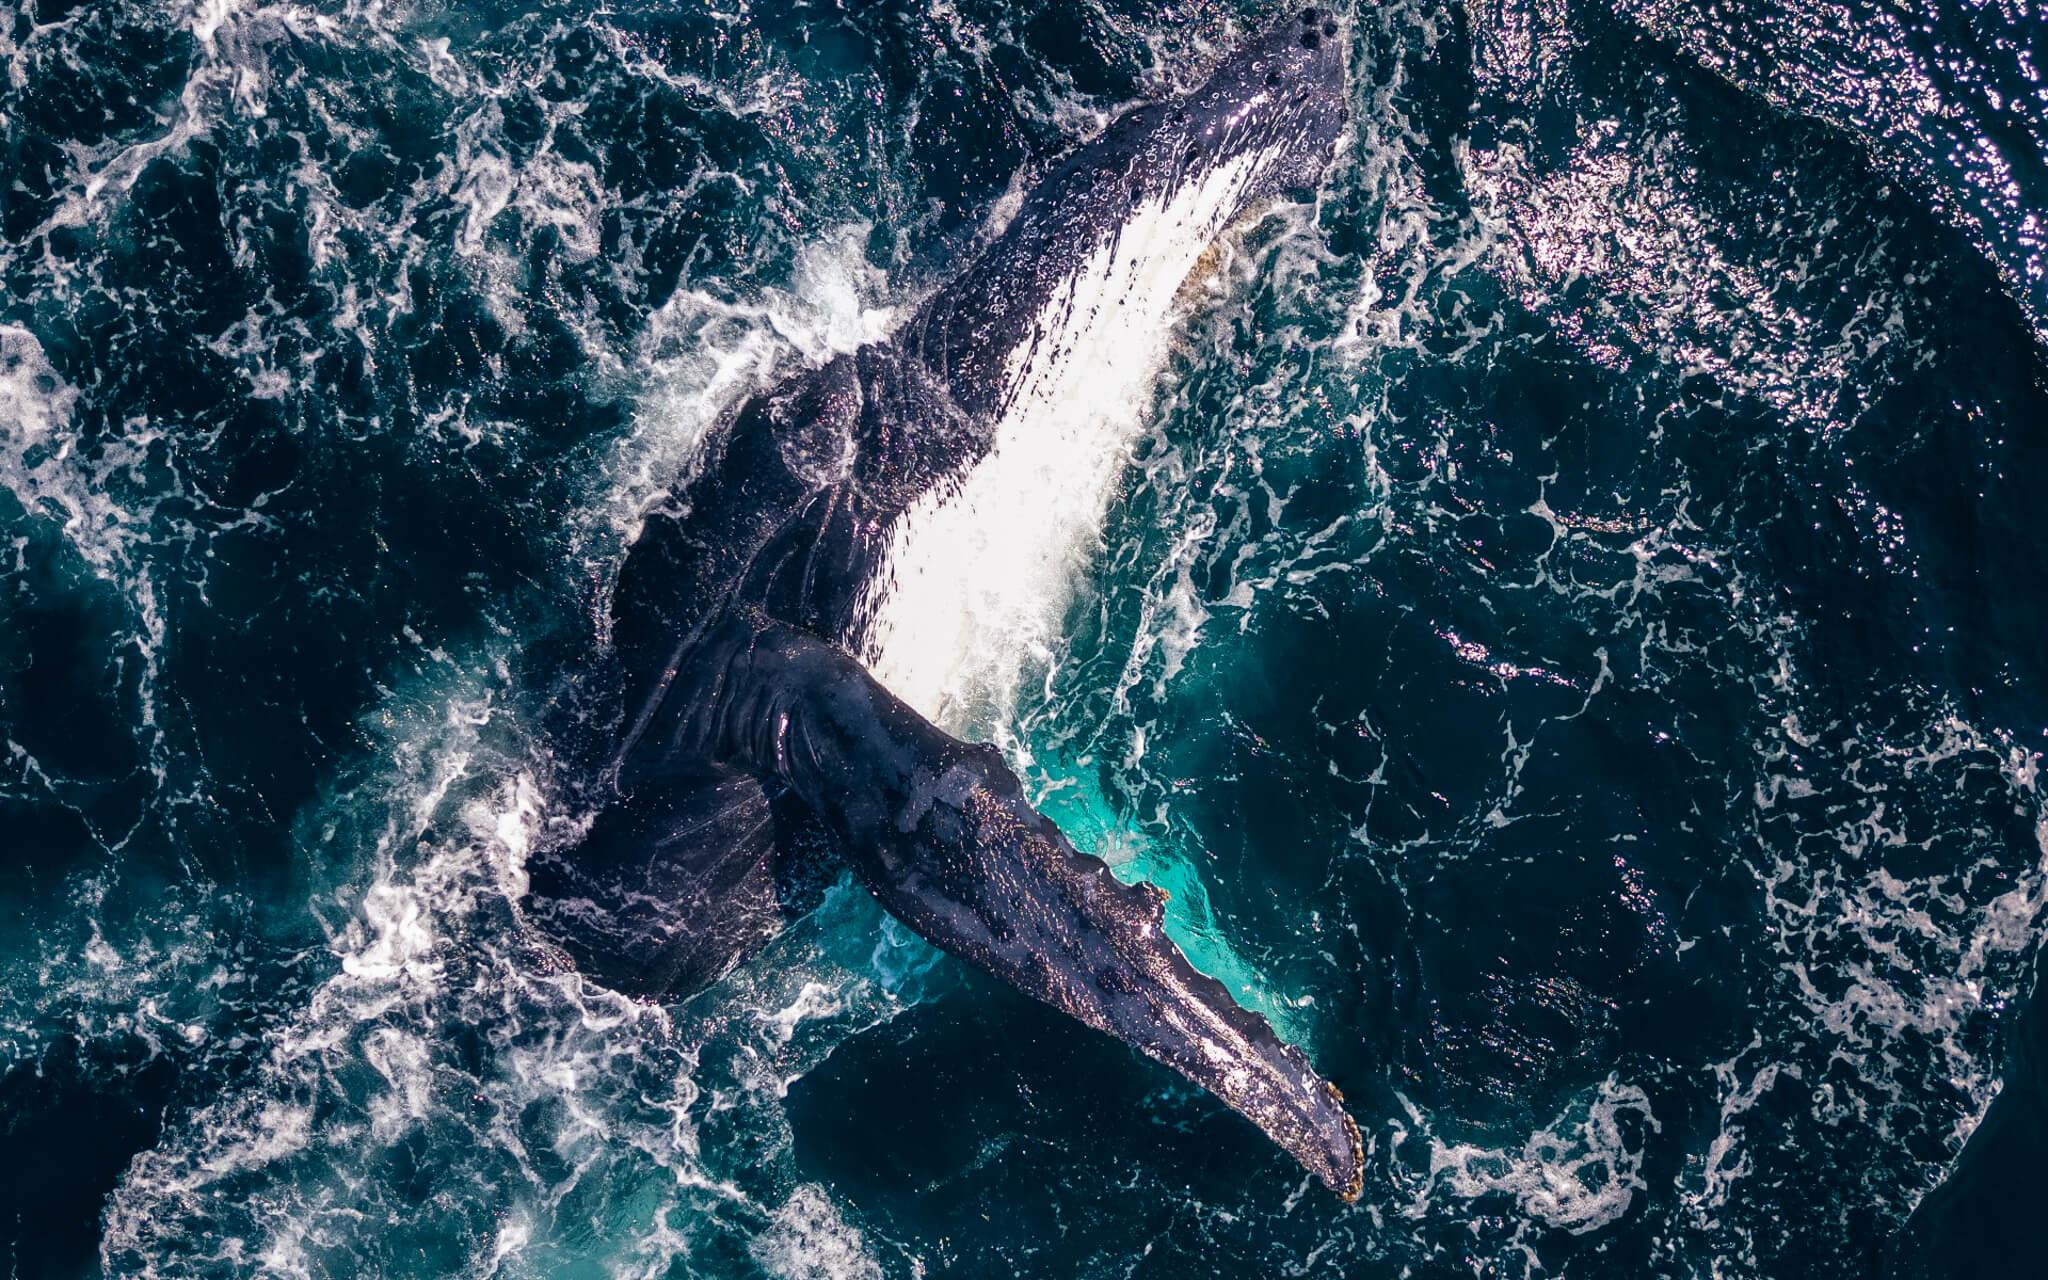 This whale is demonstrating pectoral slapping for her young calf; pectoral slapping is a powerful mode of communication for many whale species.  
Photographer: Jono Greenway